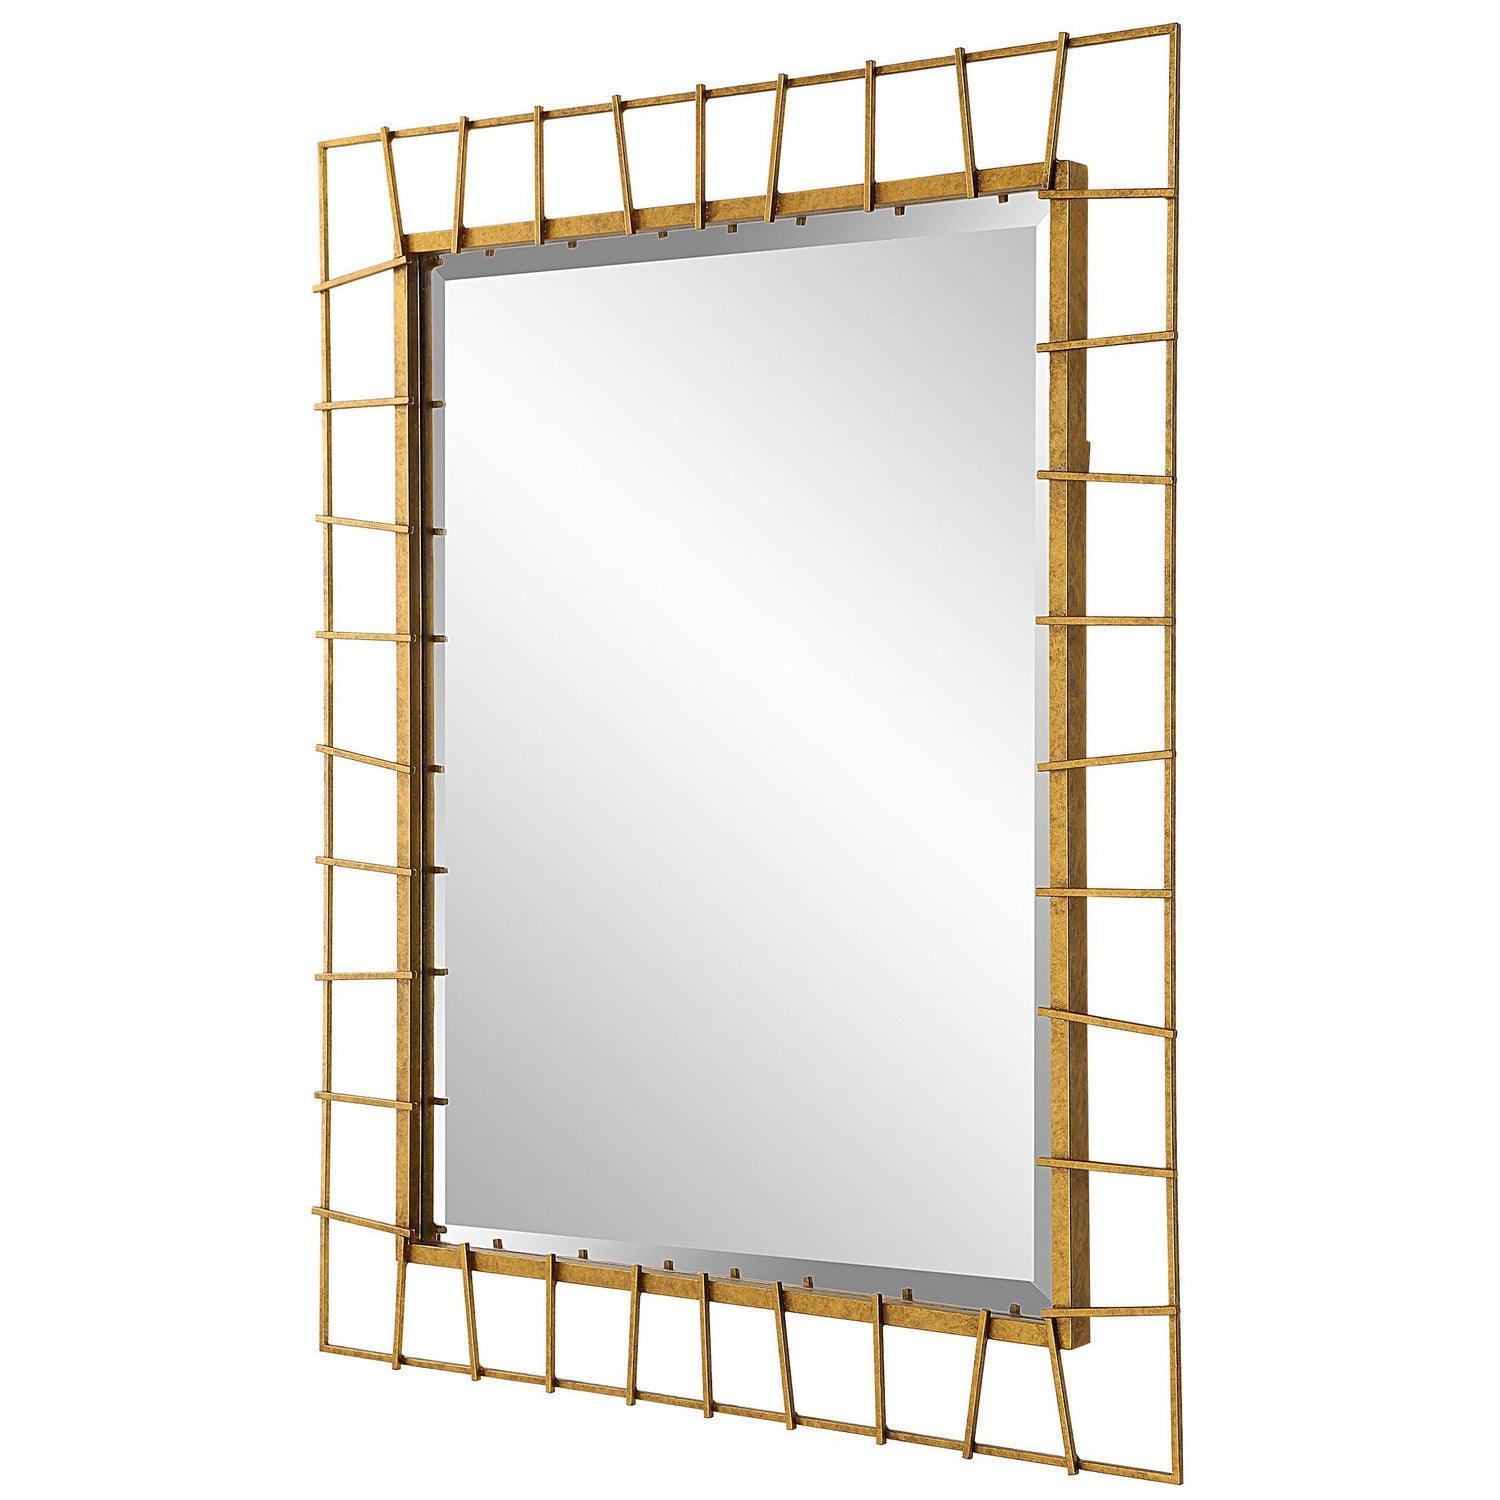 The Uttermost - Townsend Mirror - 09805 | Montreal Lighting & Hardware